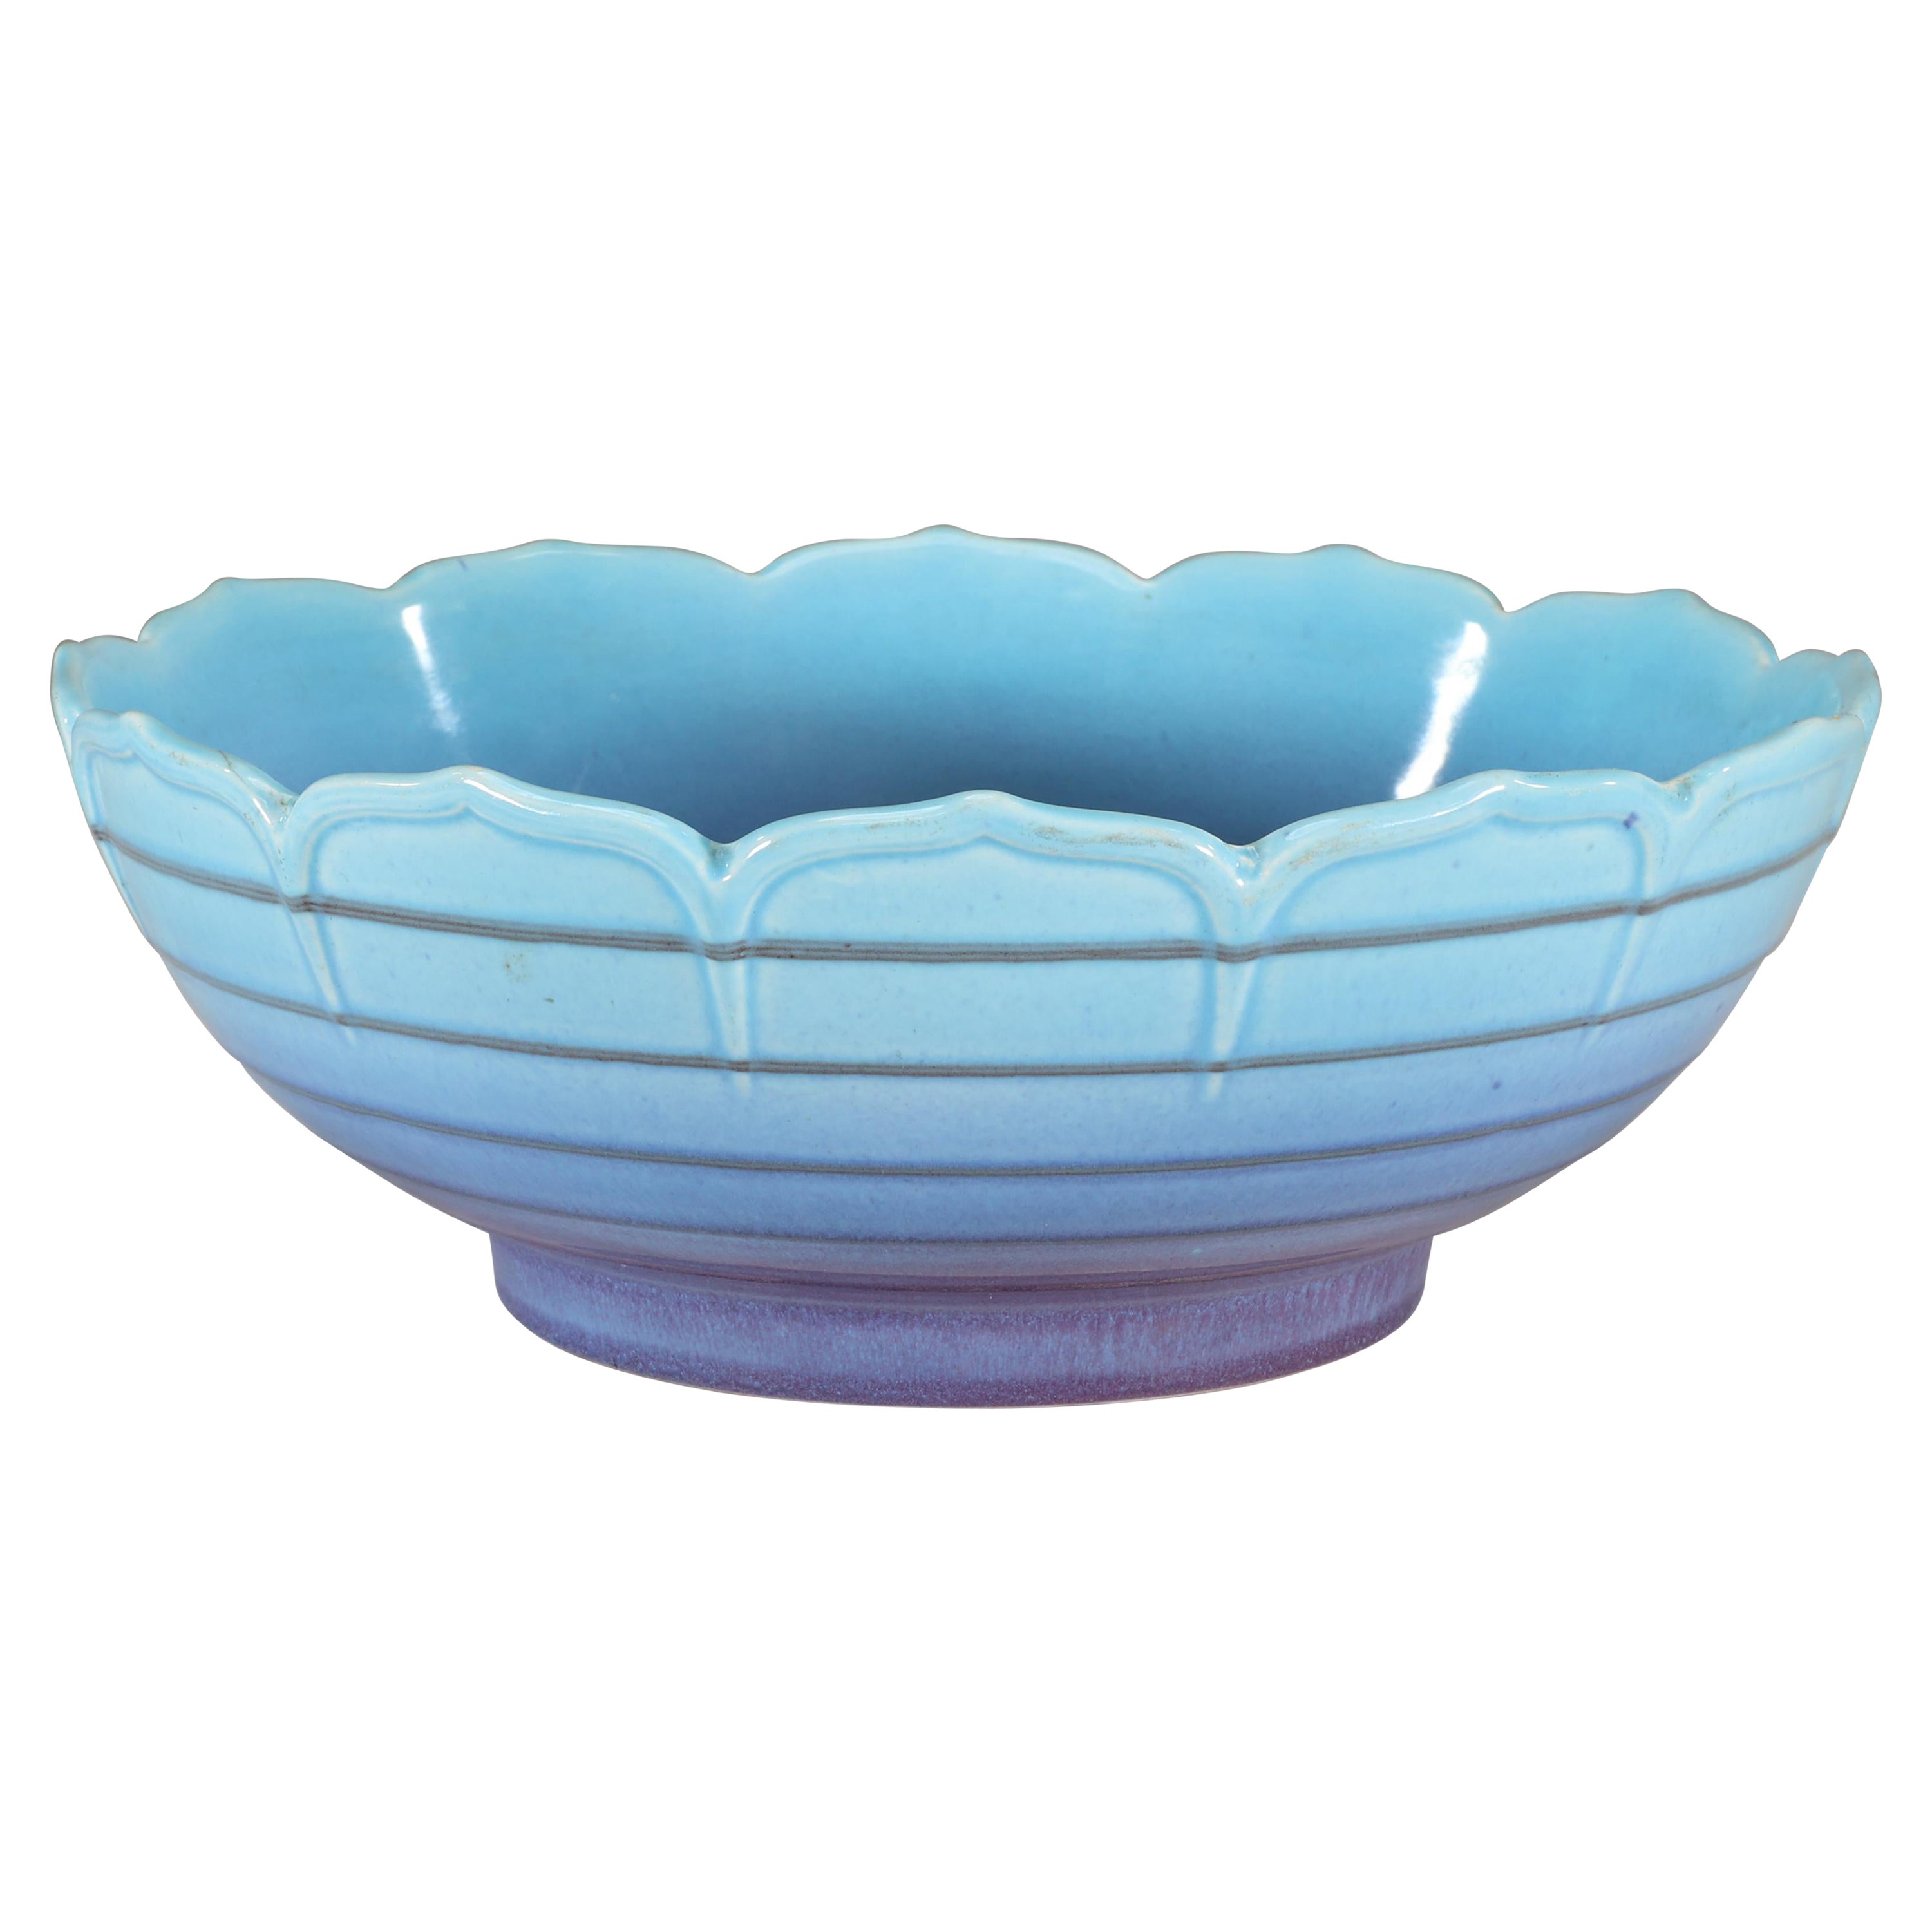 Crown Ducal. Arts & Crafts style bowl with a ground blue colour fading to lilac. For Sale